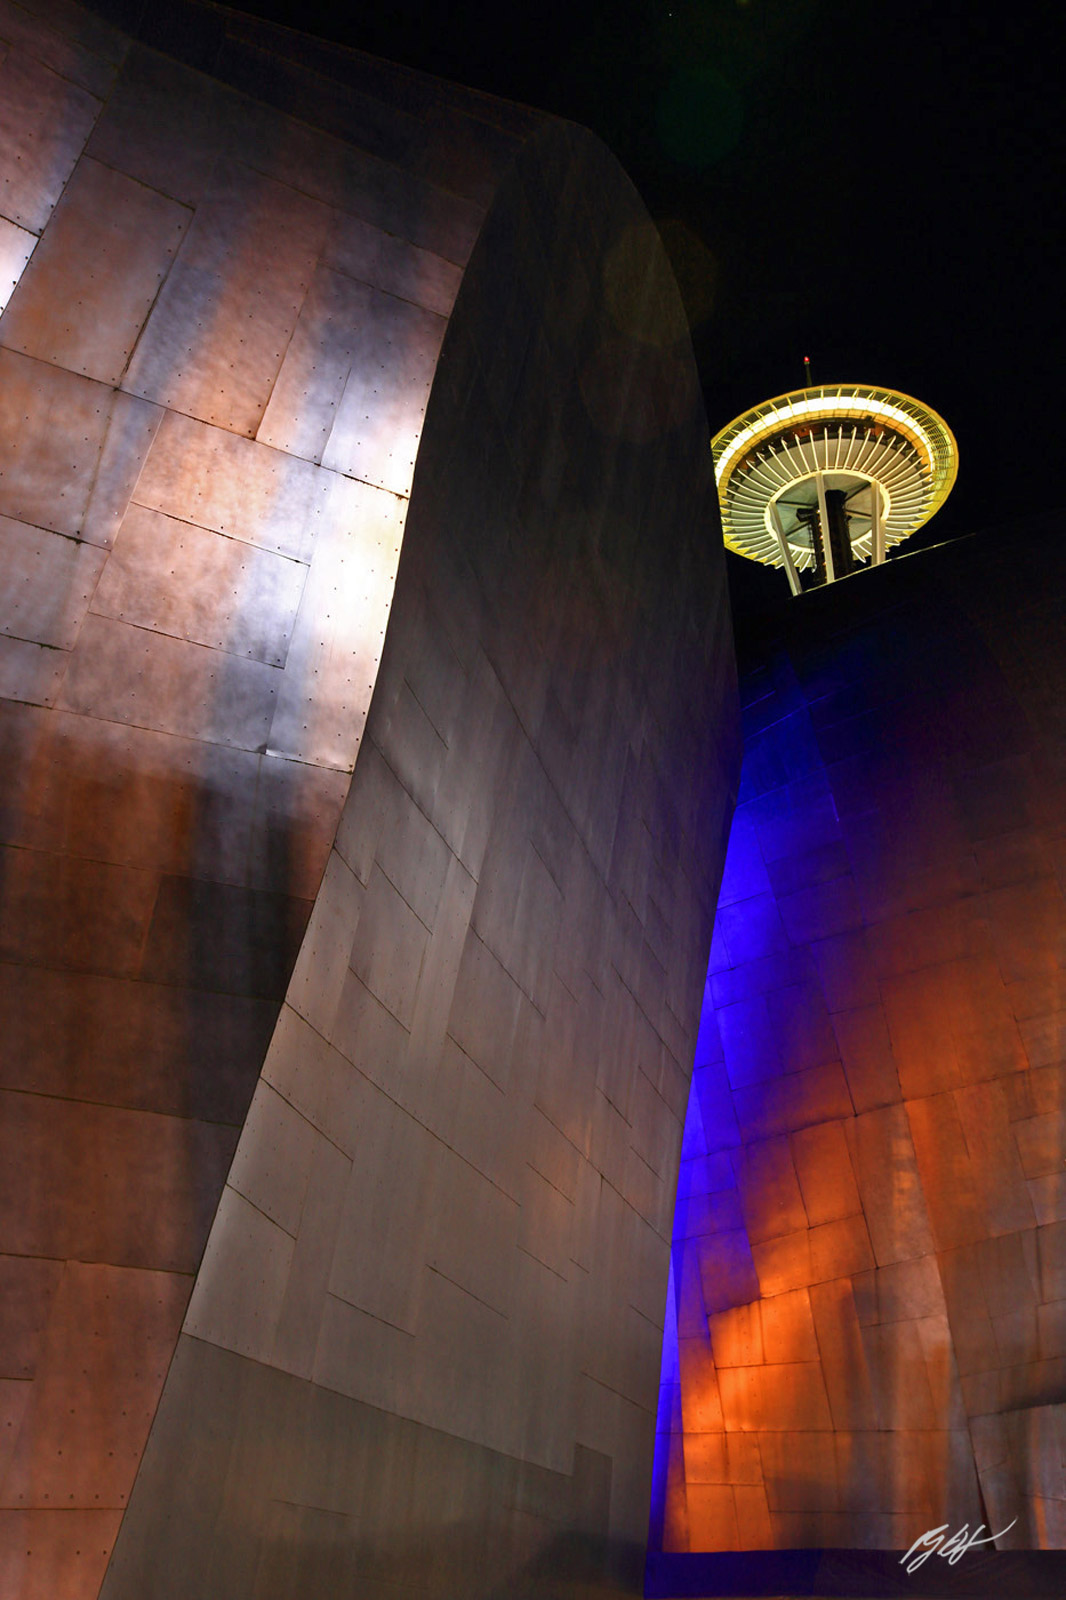 The Space Needle and the Experience Music Project in Seattle Center in Seattle, Washington